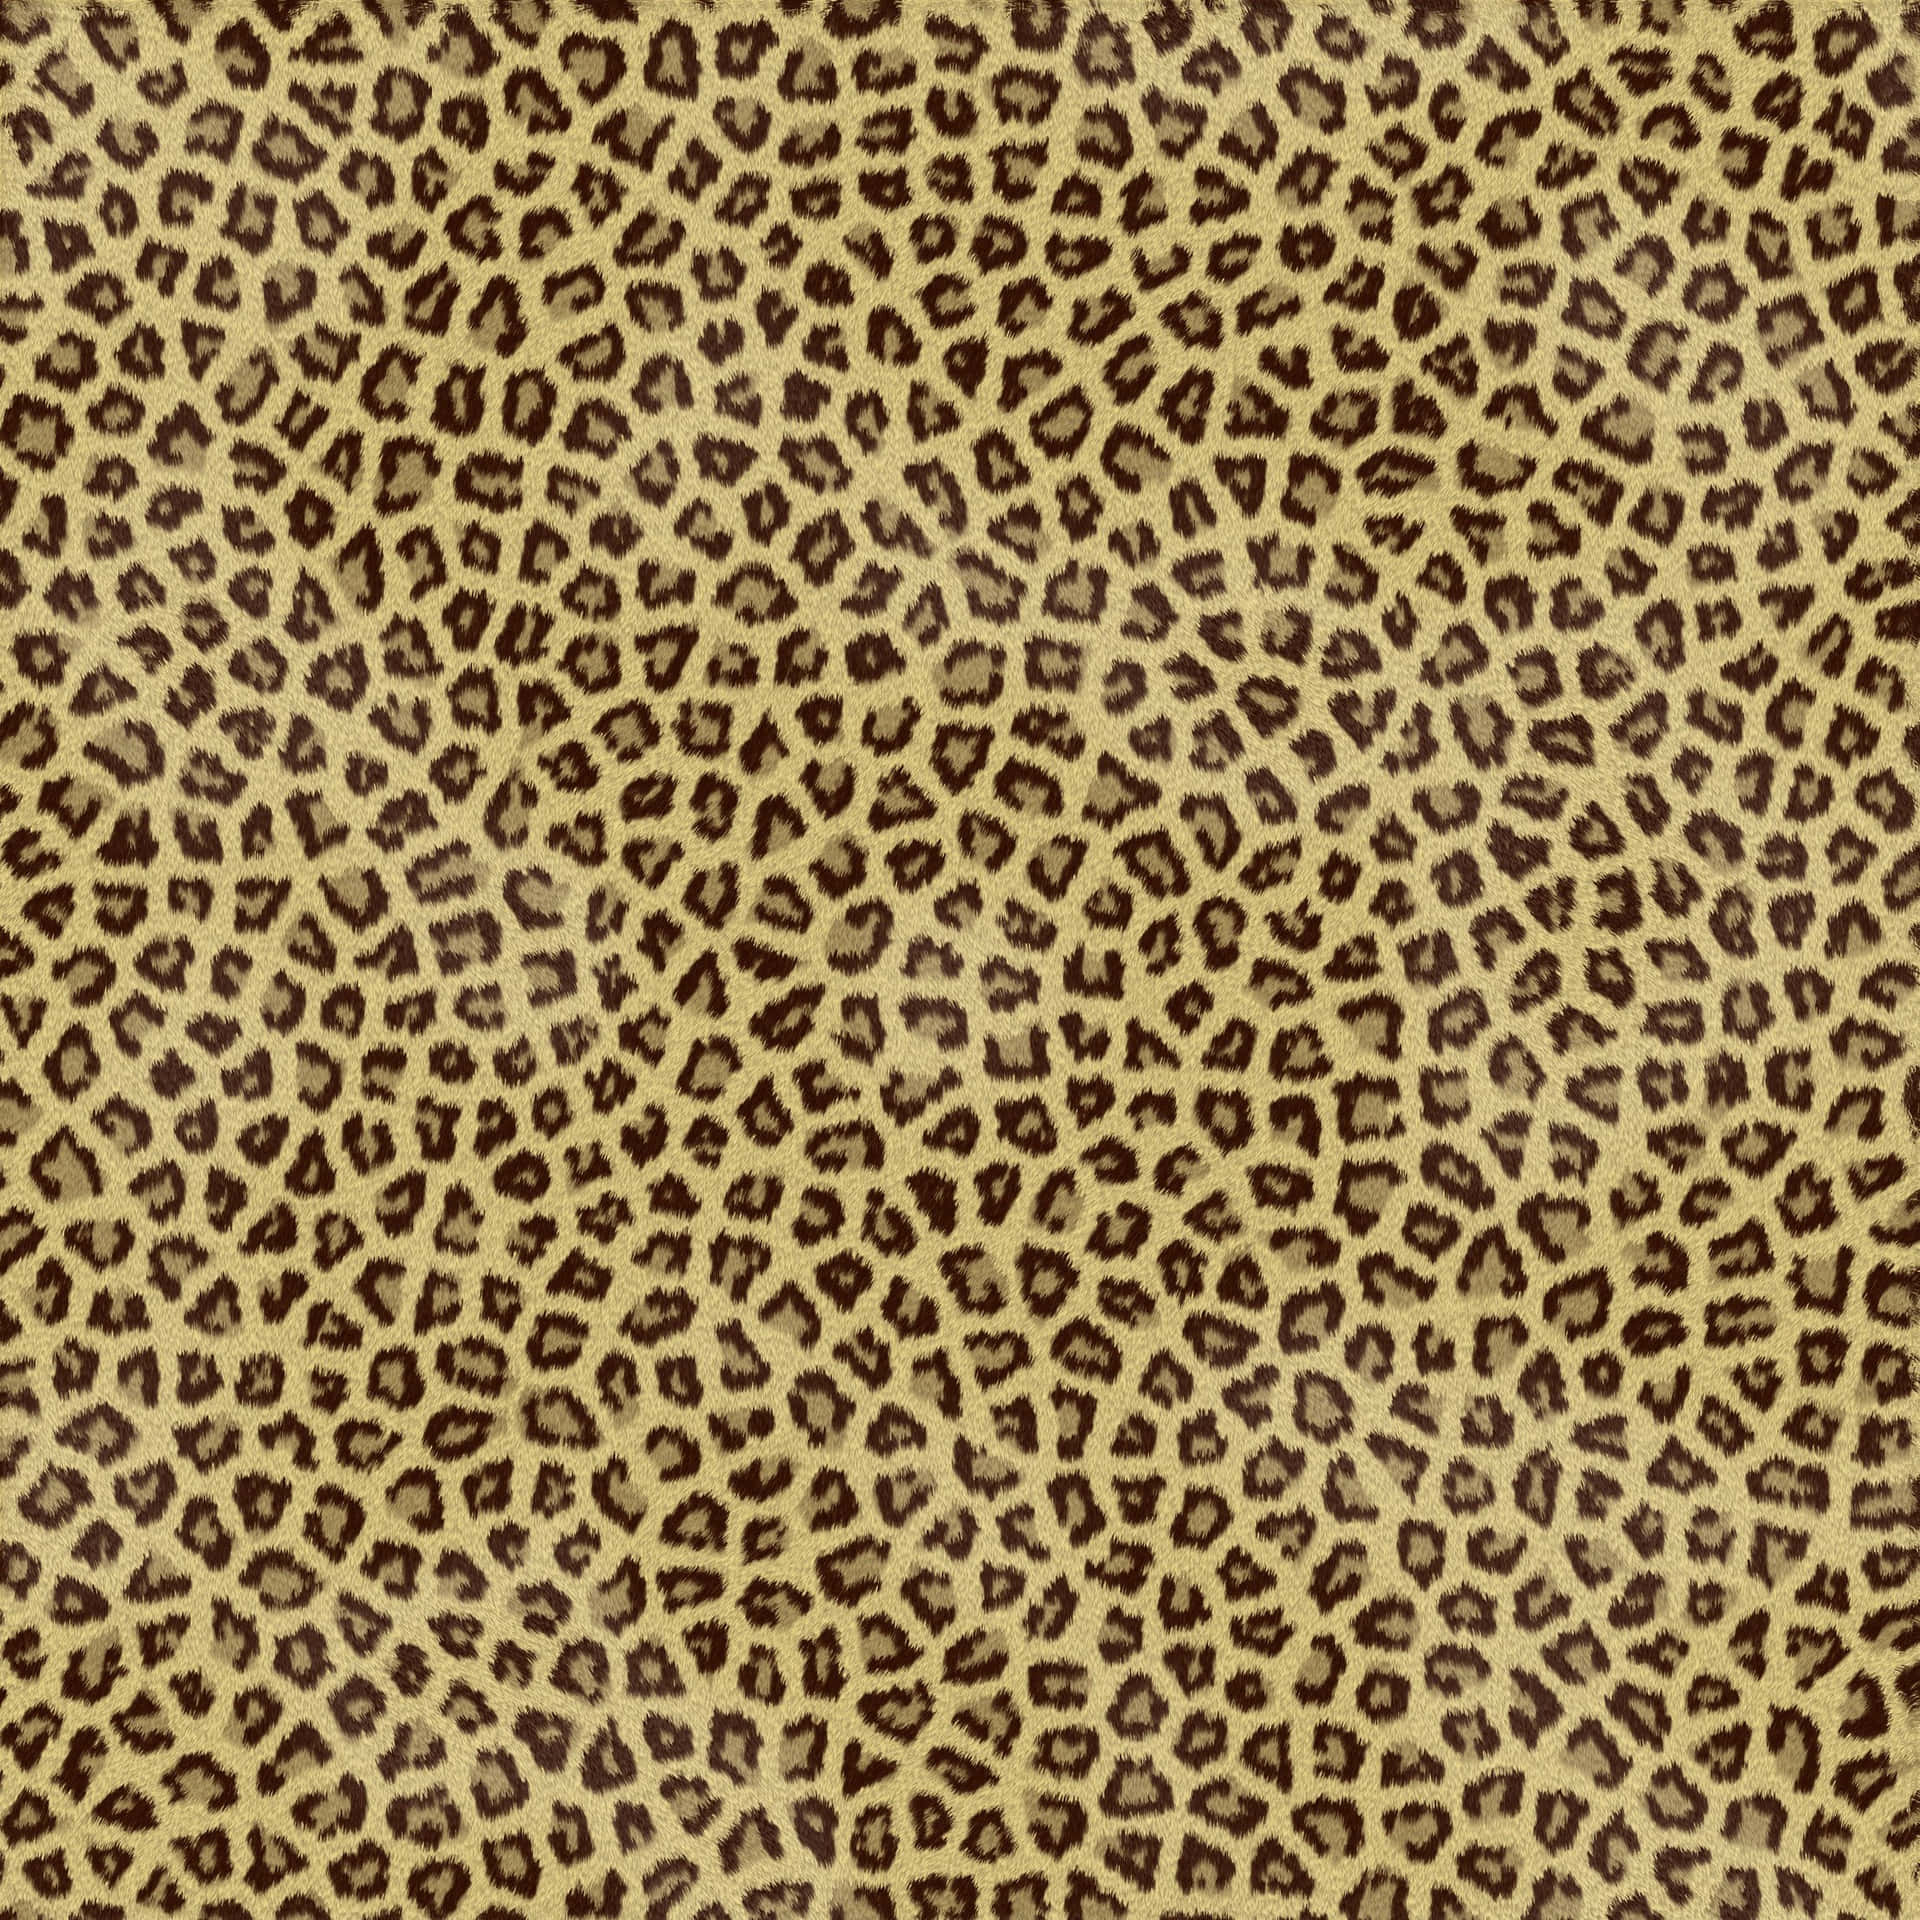 Feel wild and free in this beautiful cheetah print background.